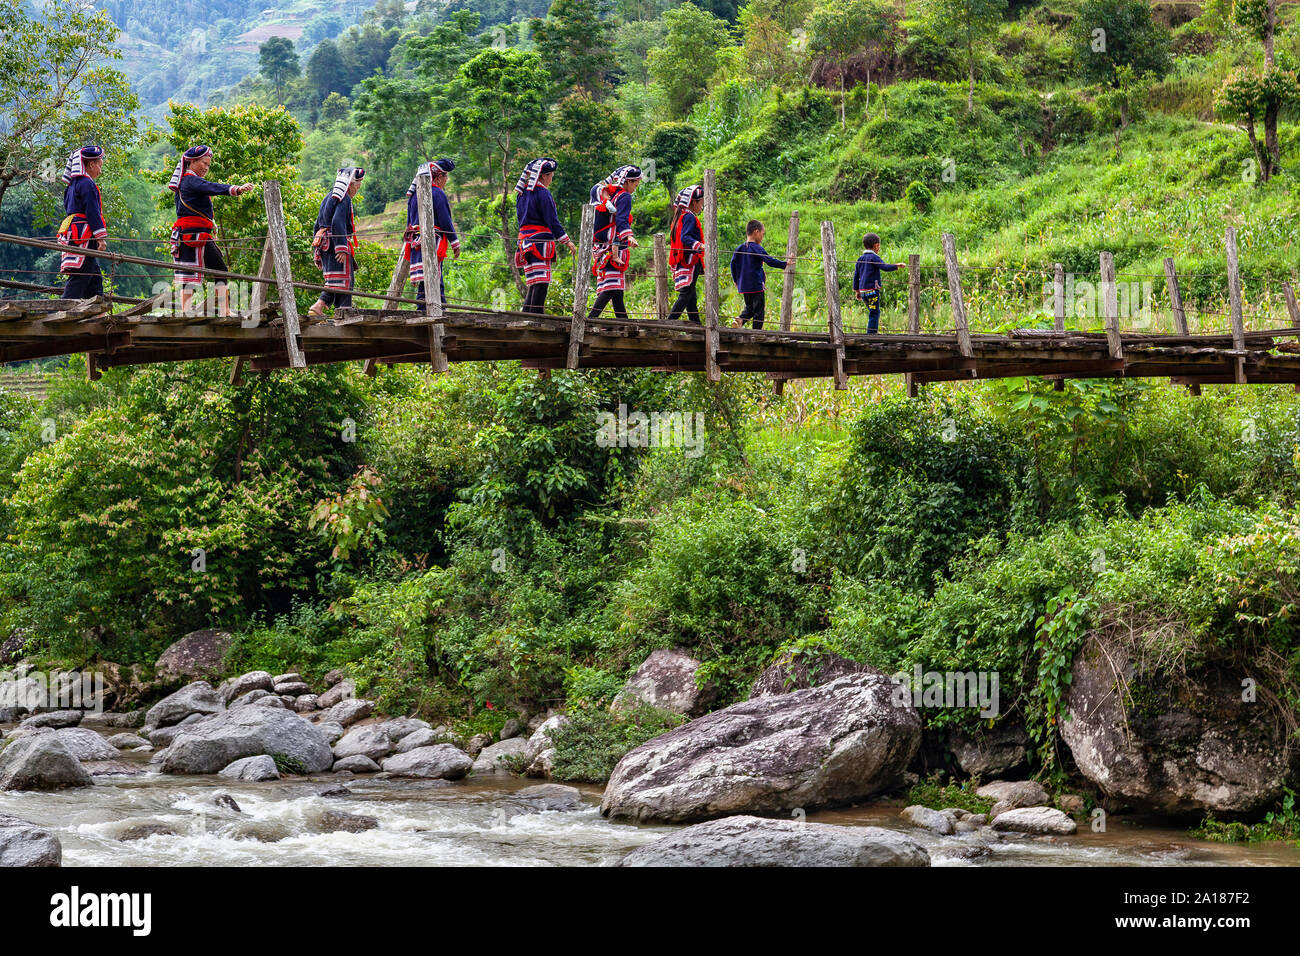 Red Dao ethnic minority people (Dao Do), on a small suspension bridge in Hoang Su Phi, Ha Giang province, in the mountainous northwestern part of Viet Stock Photo